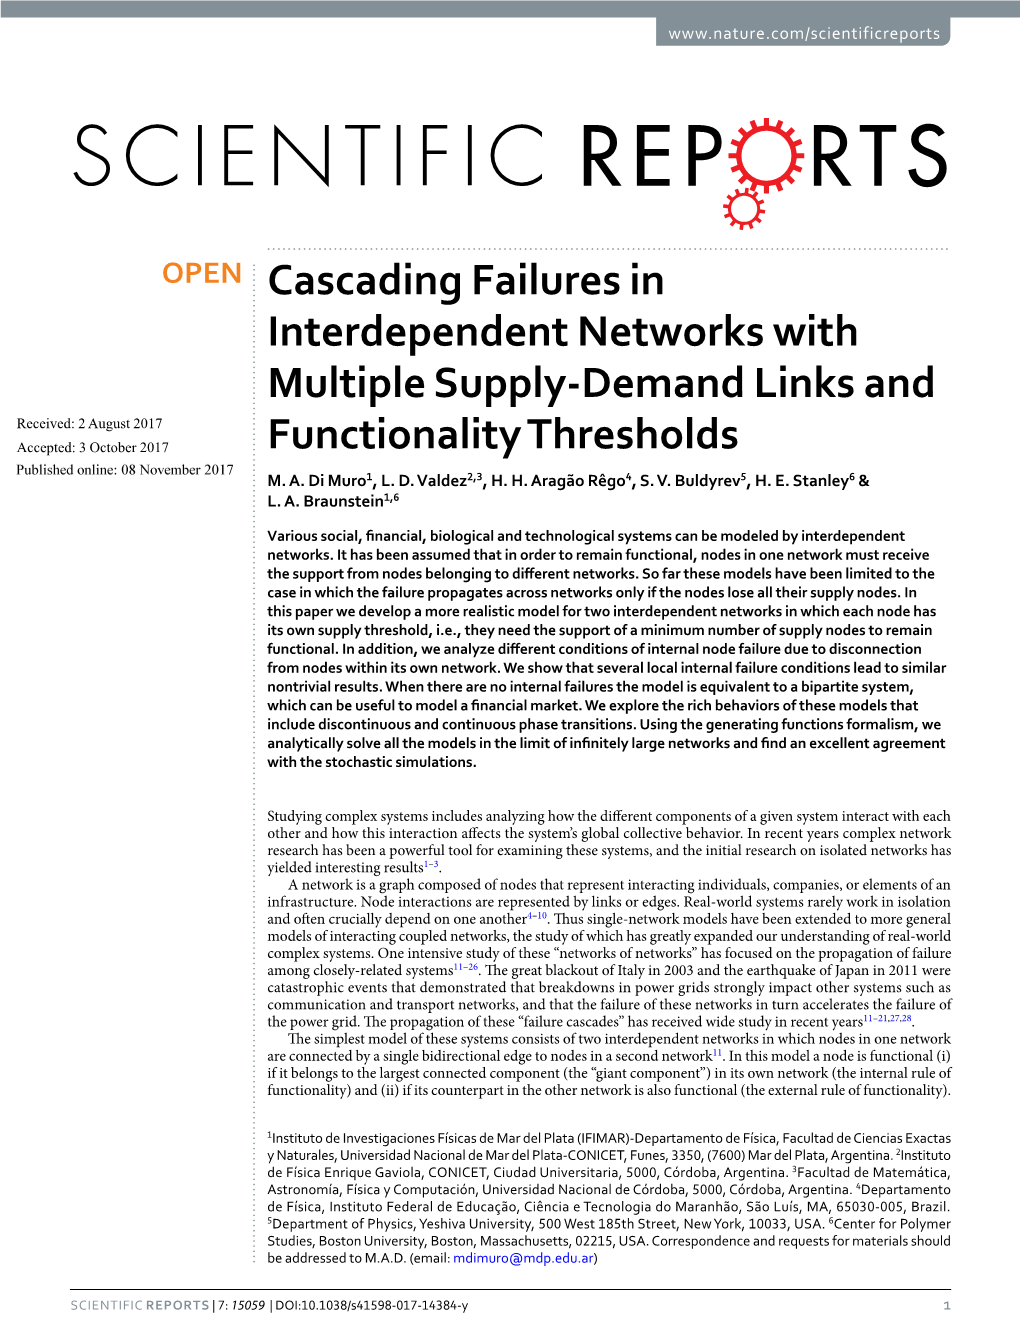 Cascading Failures in Interdependent Networks with Multiple